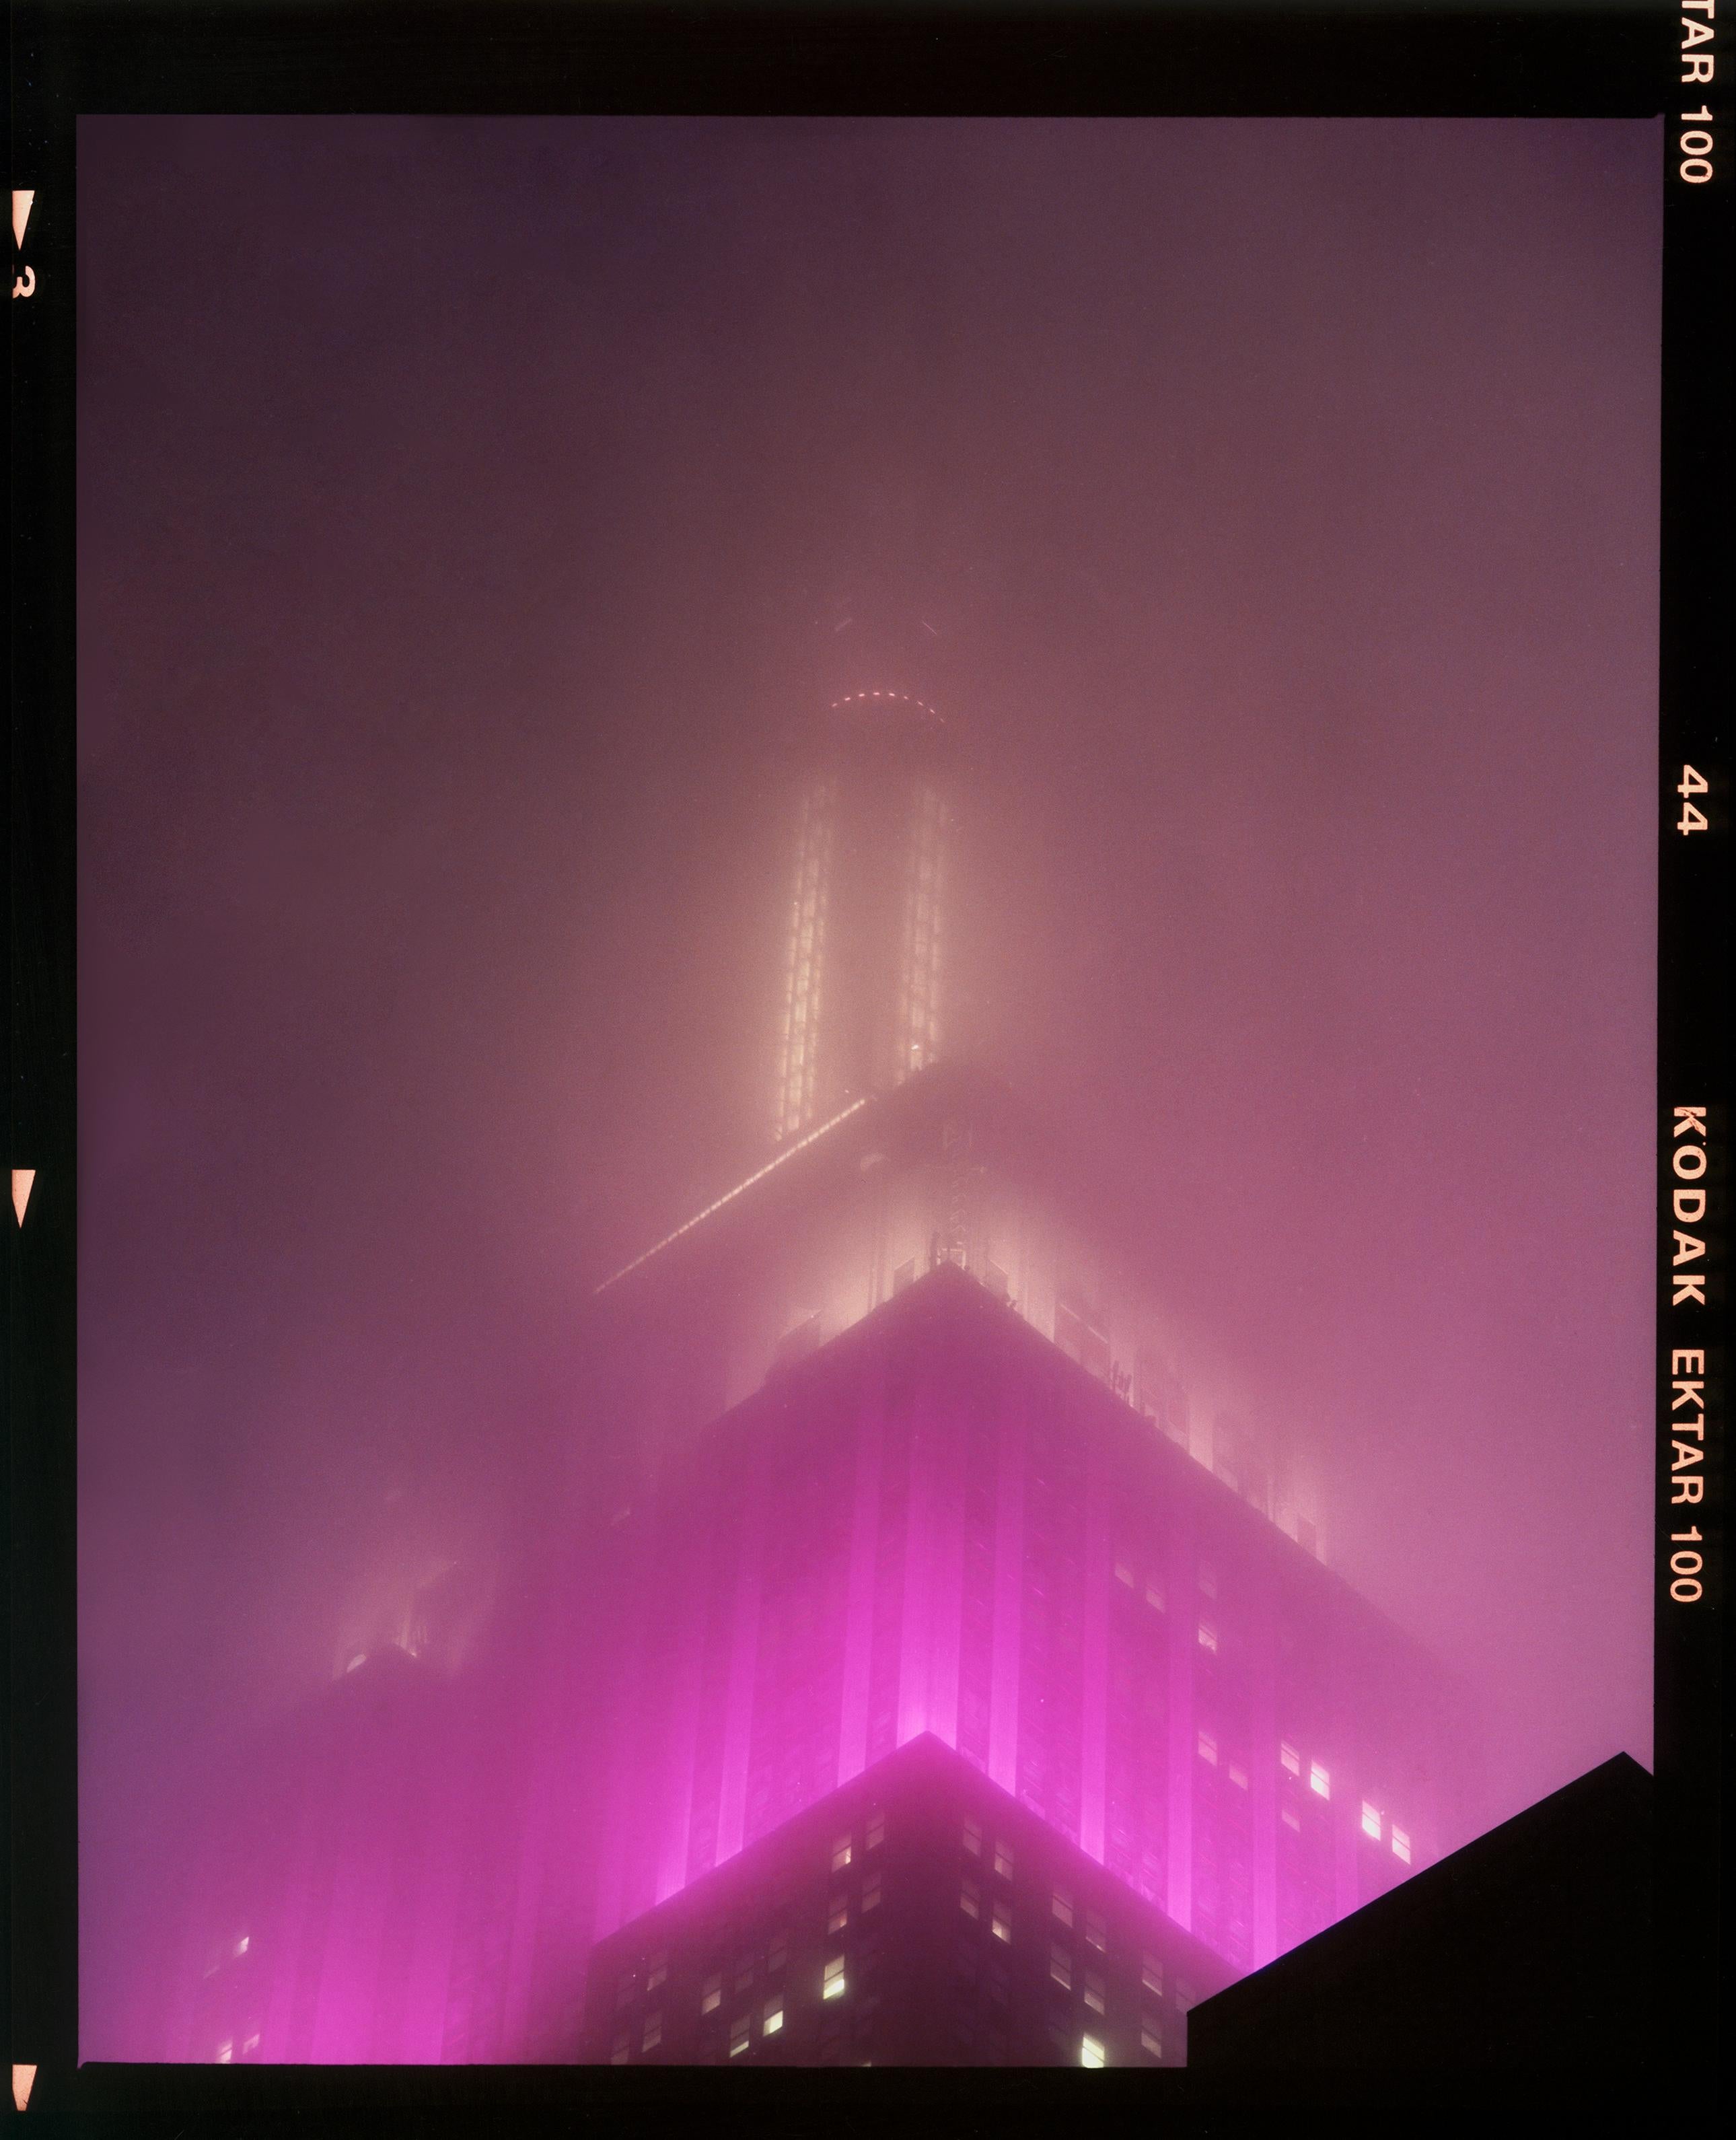 'NOMAD XI (Film Rebate)', New York. Richard Heeps has photographed the iconic Empire State building in the mist. The NOMAD sequence of photographs capture the art deco architecture illuminated by changing colours, and is part of Richard's street